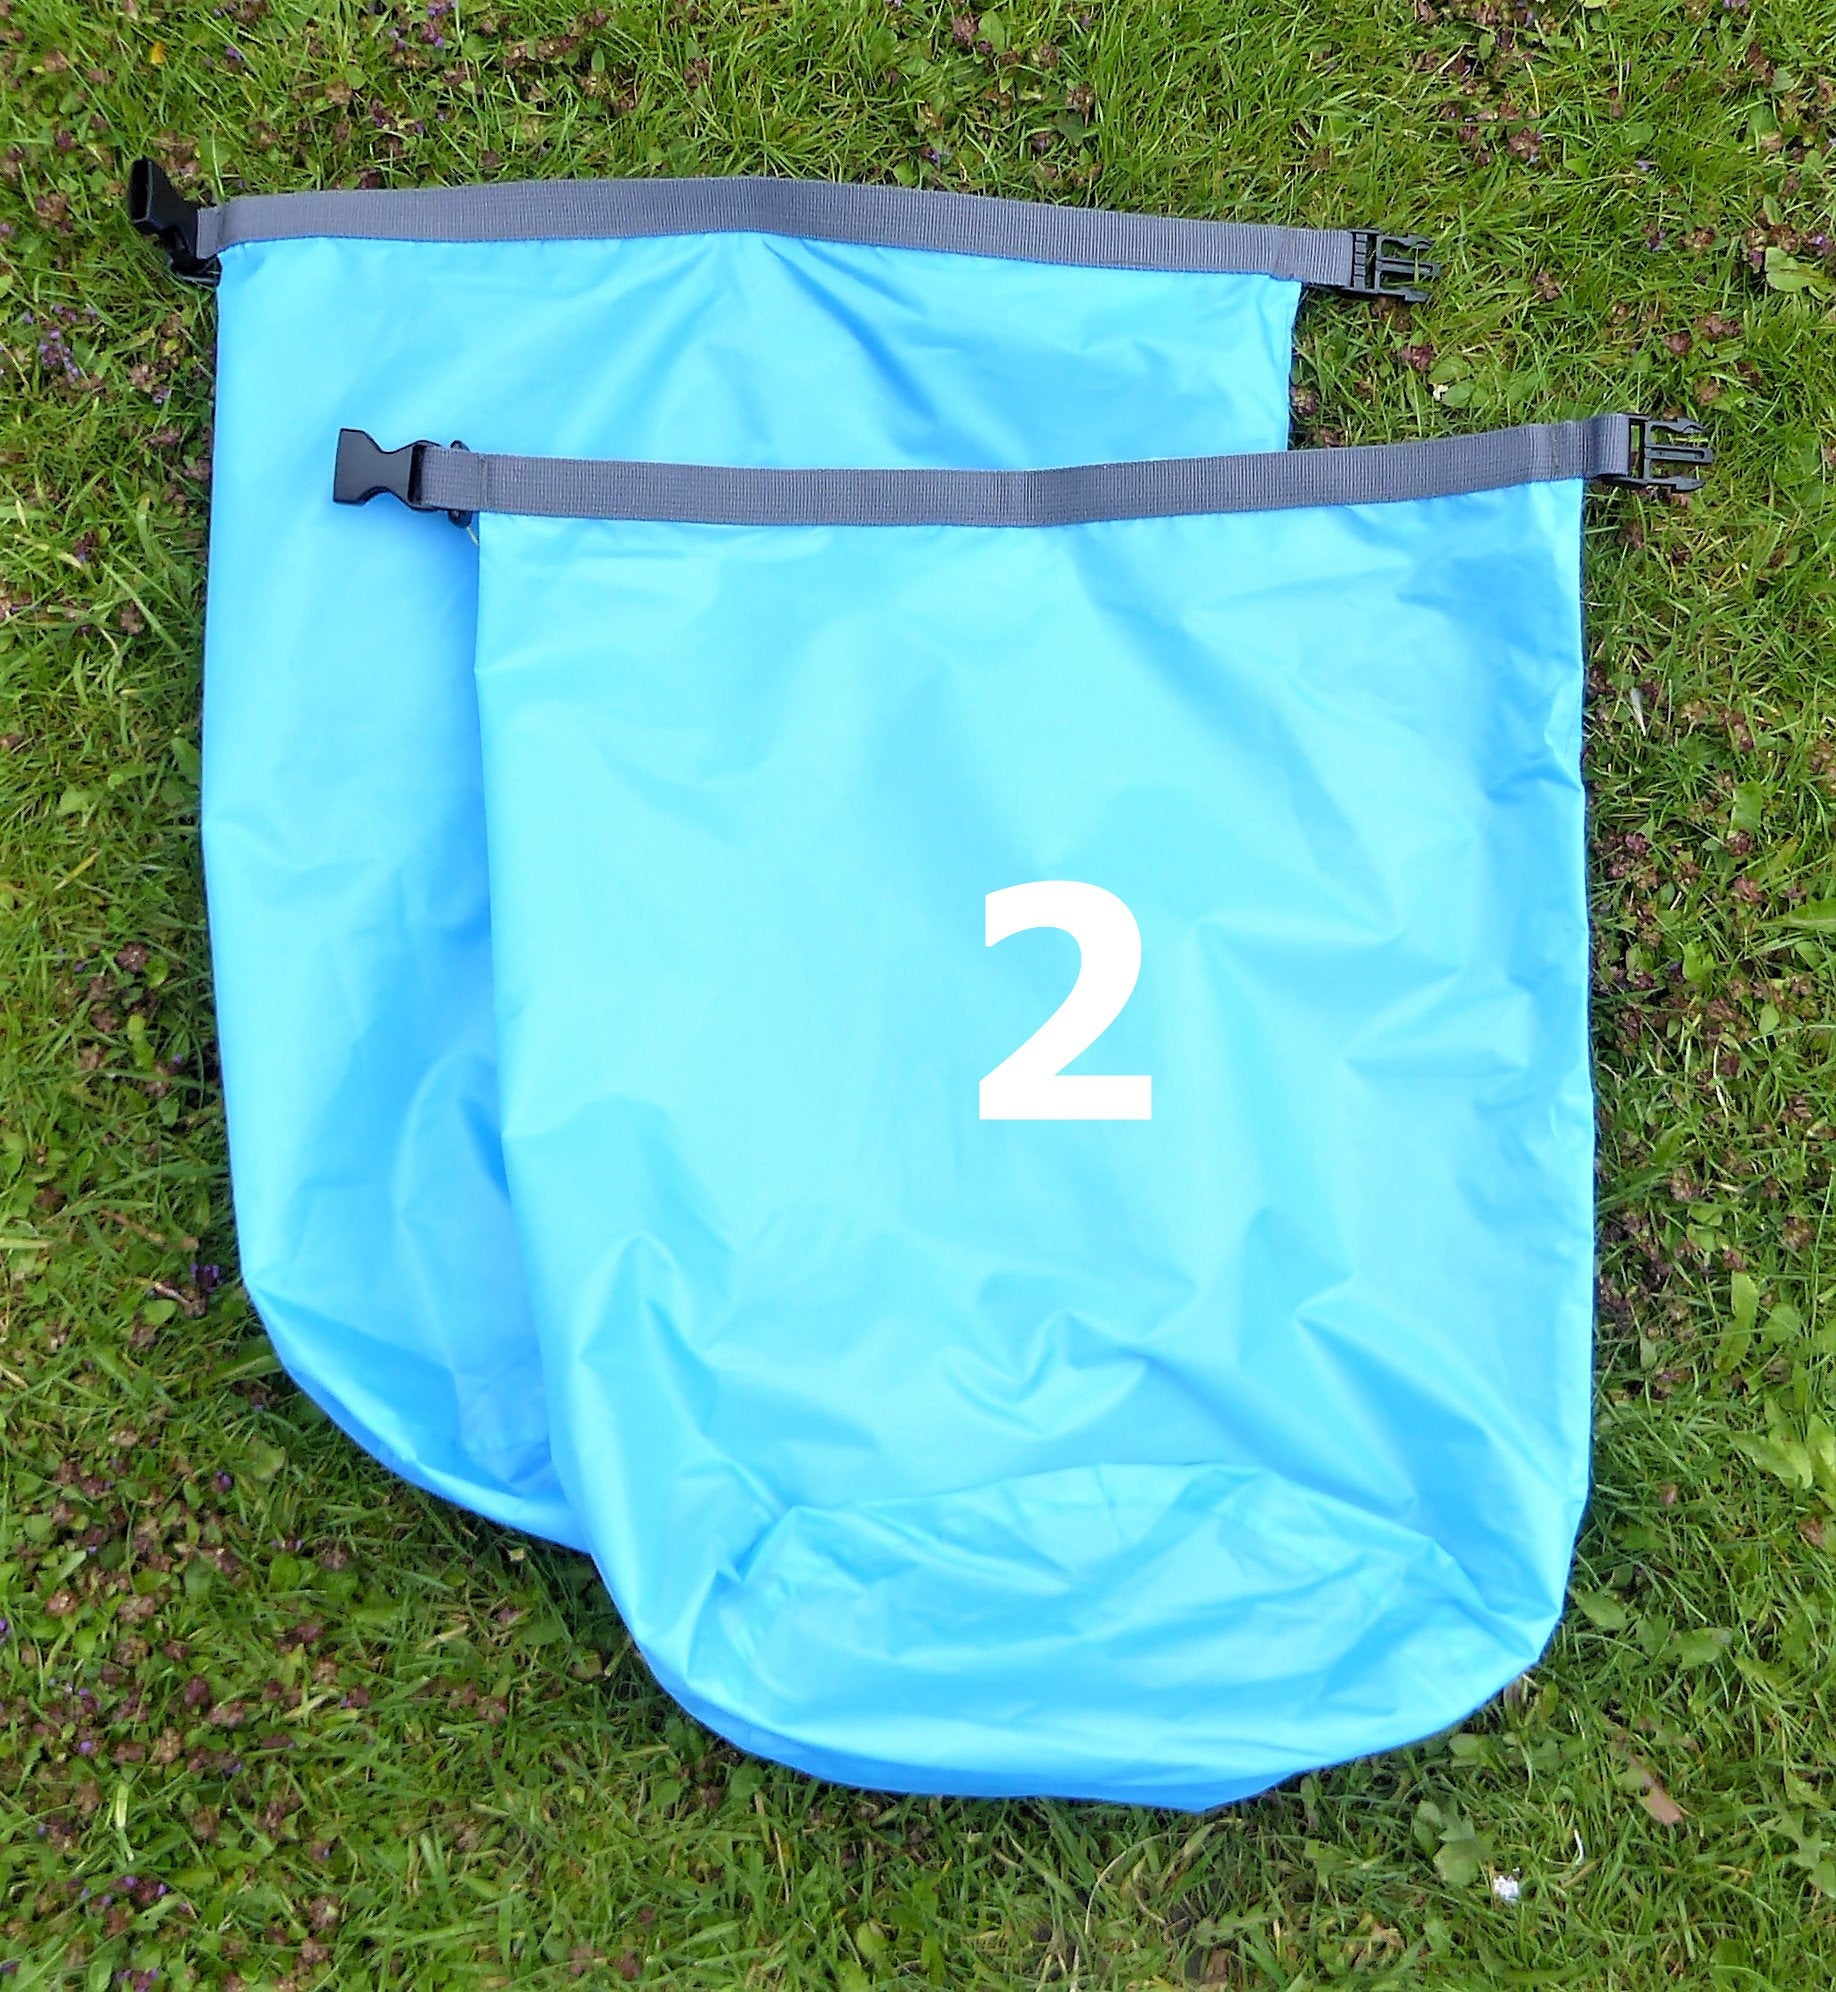 20L Dry Bags a useful and versatile piece of equipment for outdoor activities such as hiking, camping, kayaking, canoeing  Huggins Attic 2   [Huggins attic]